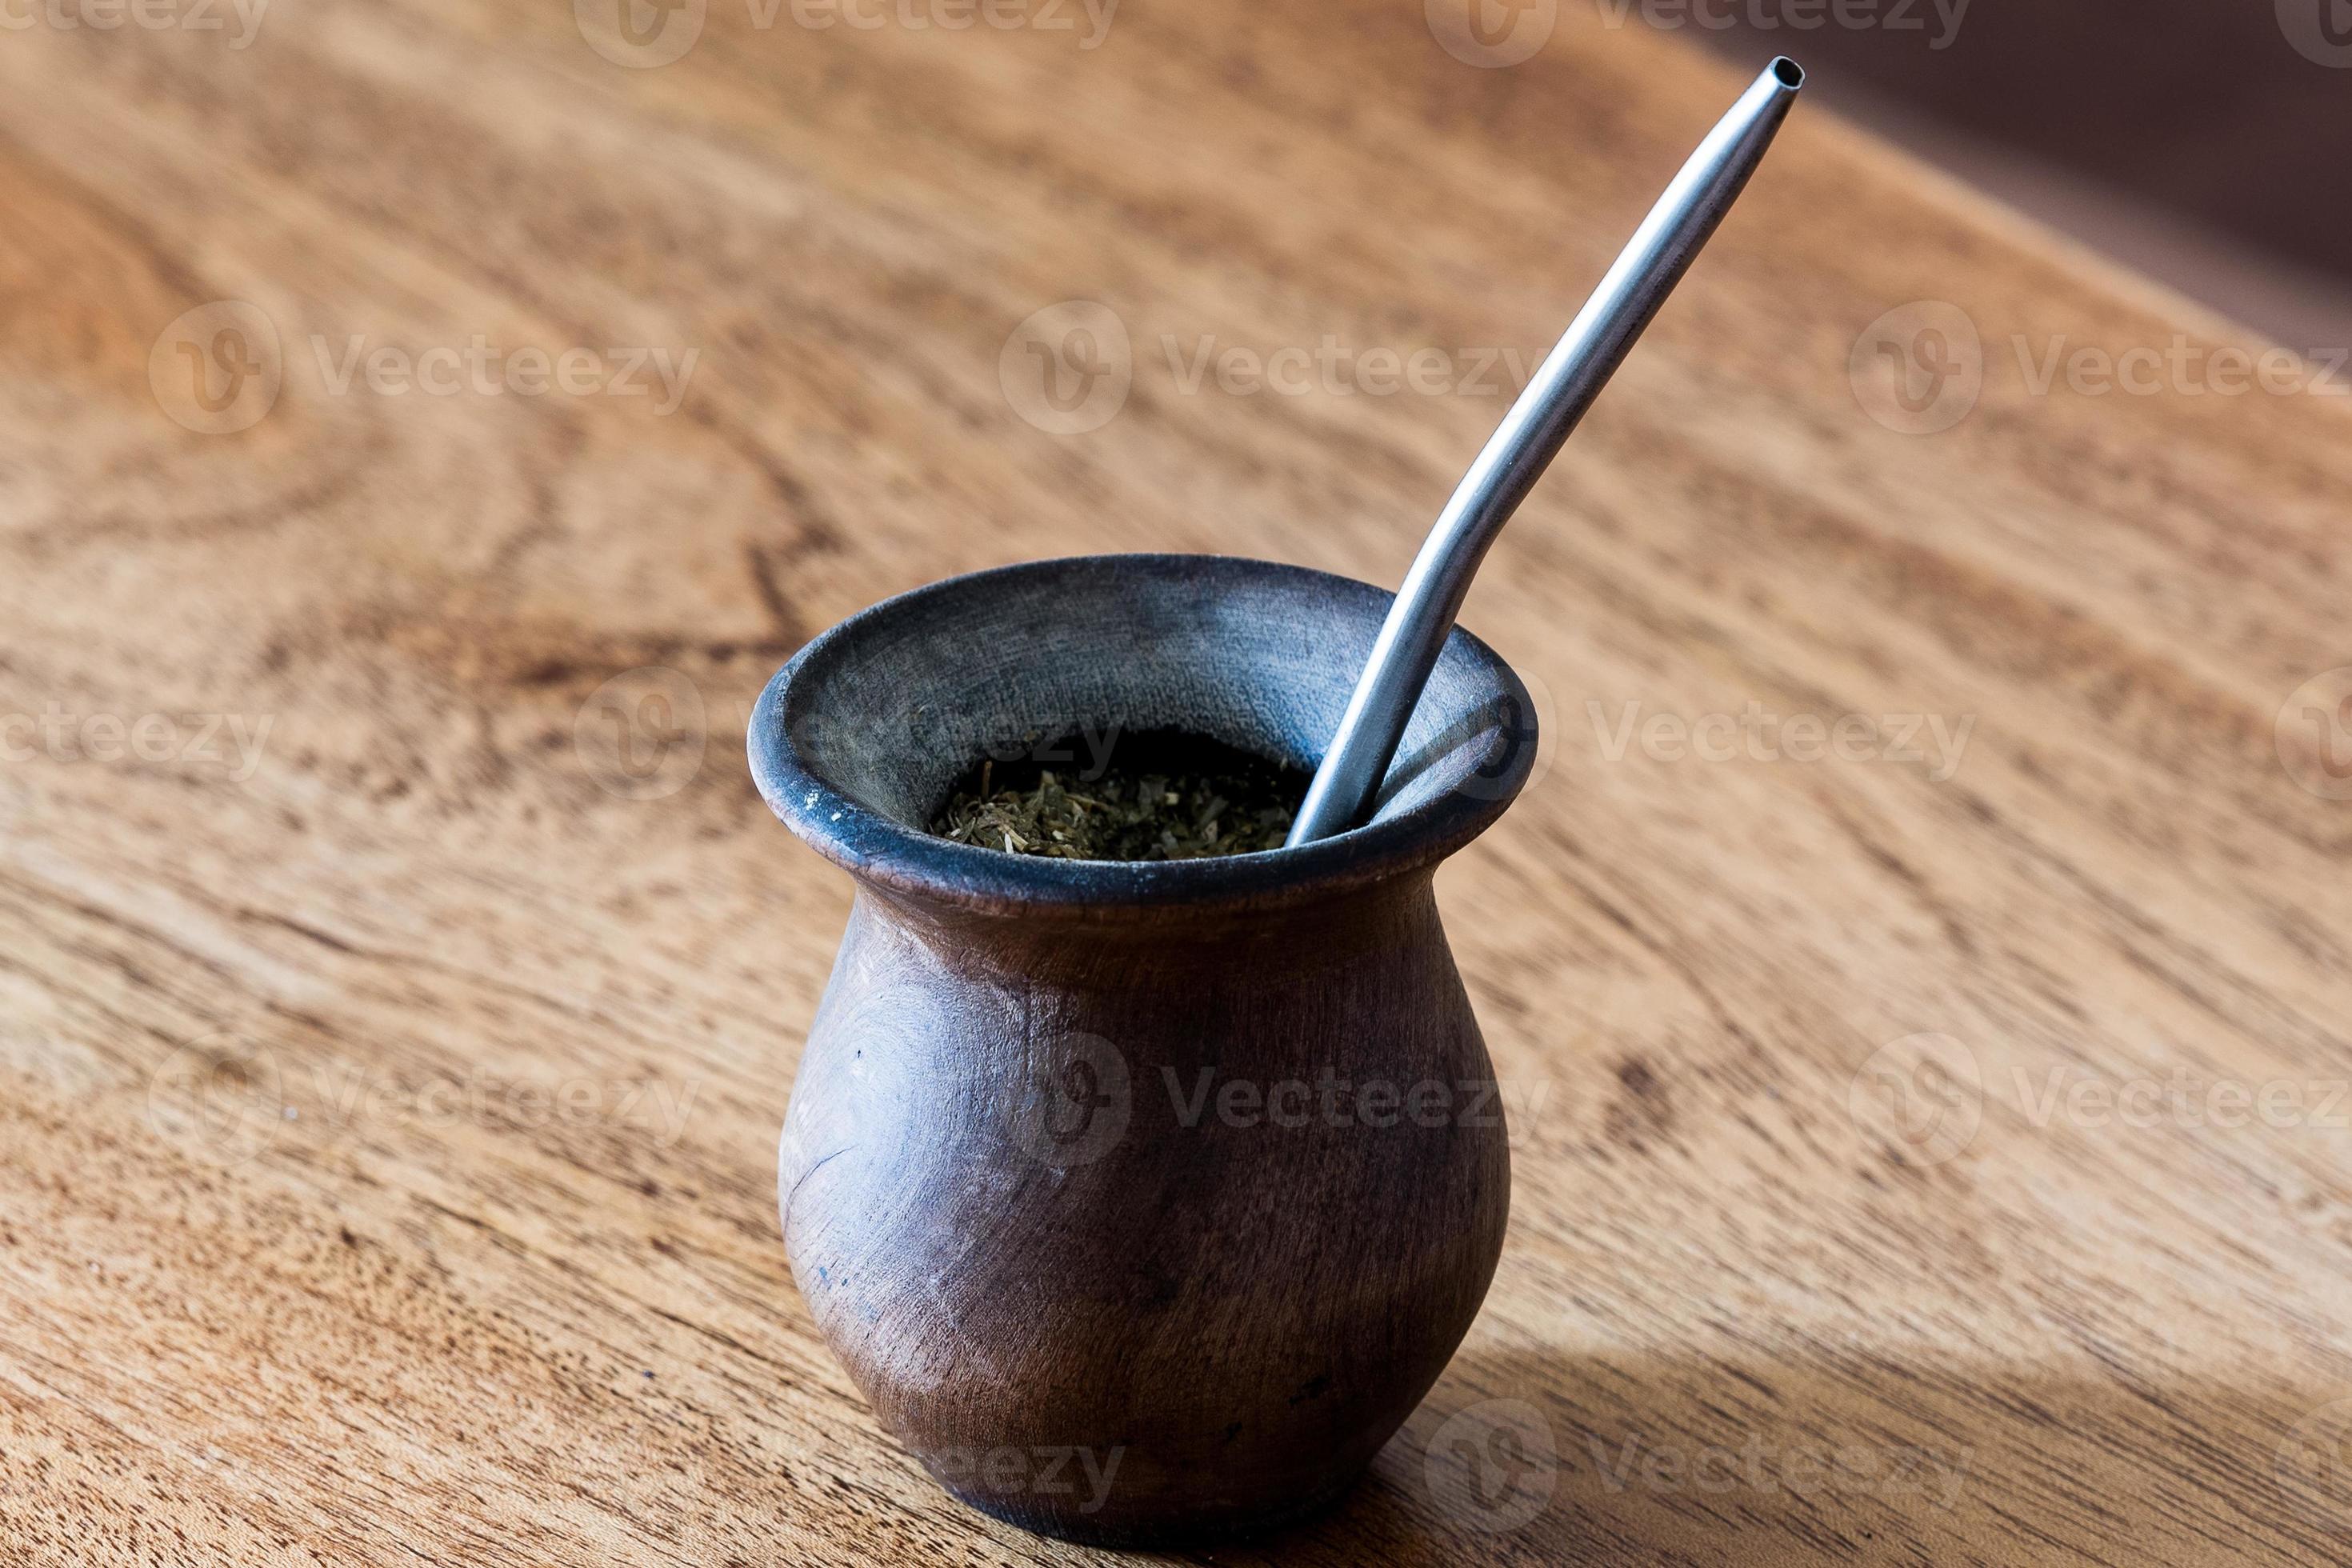 The Mate drink from Uruguay, Argentina, Paraguay and Brazil. Modern mate  colour brown 3827304 Stock Photo at Vecteezy